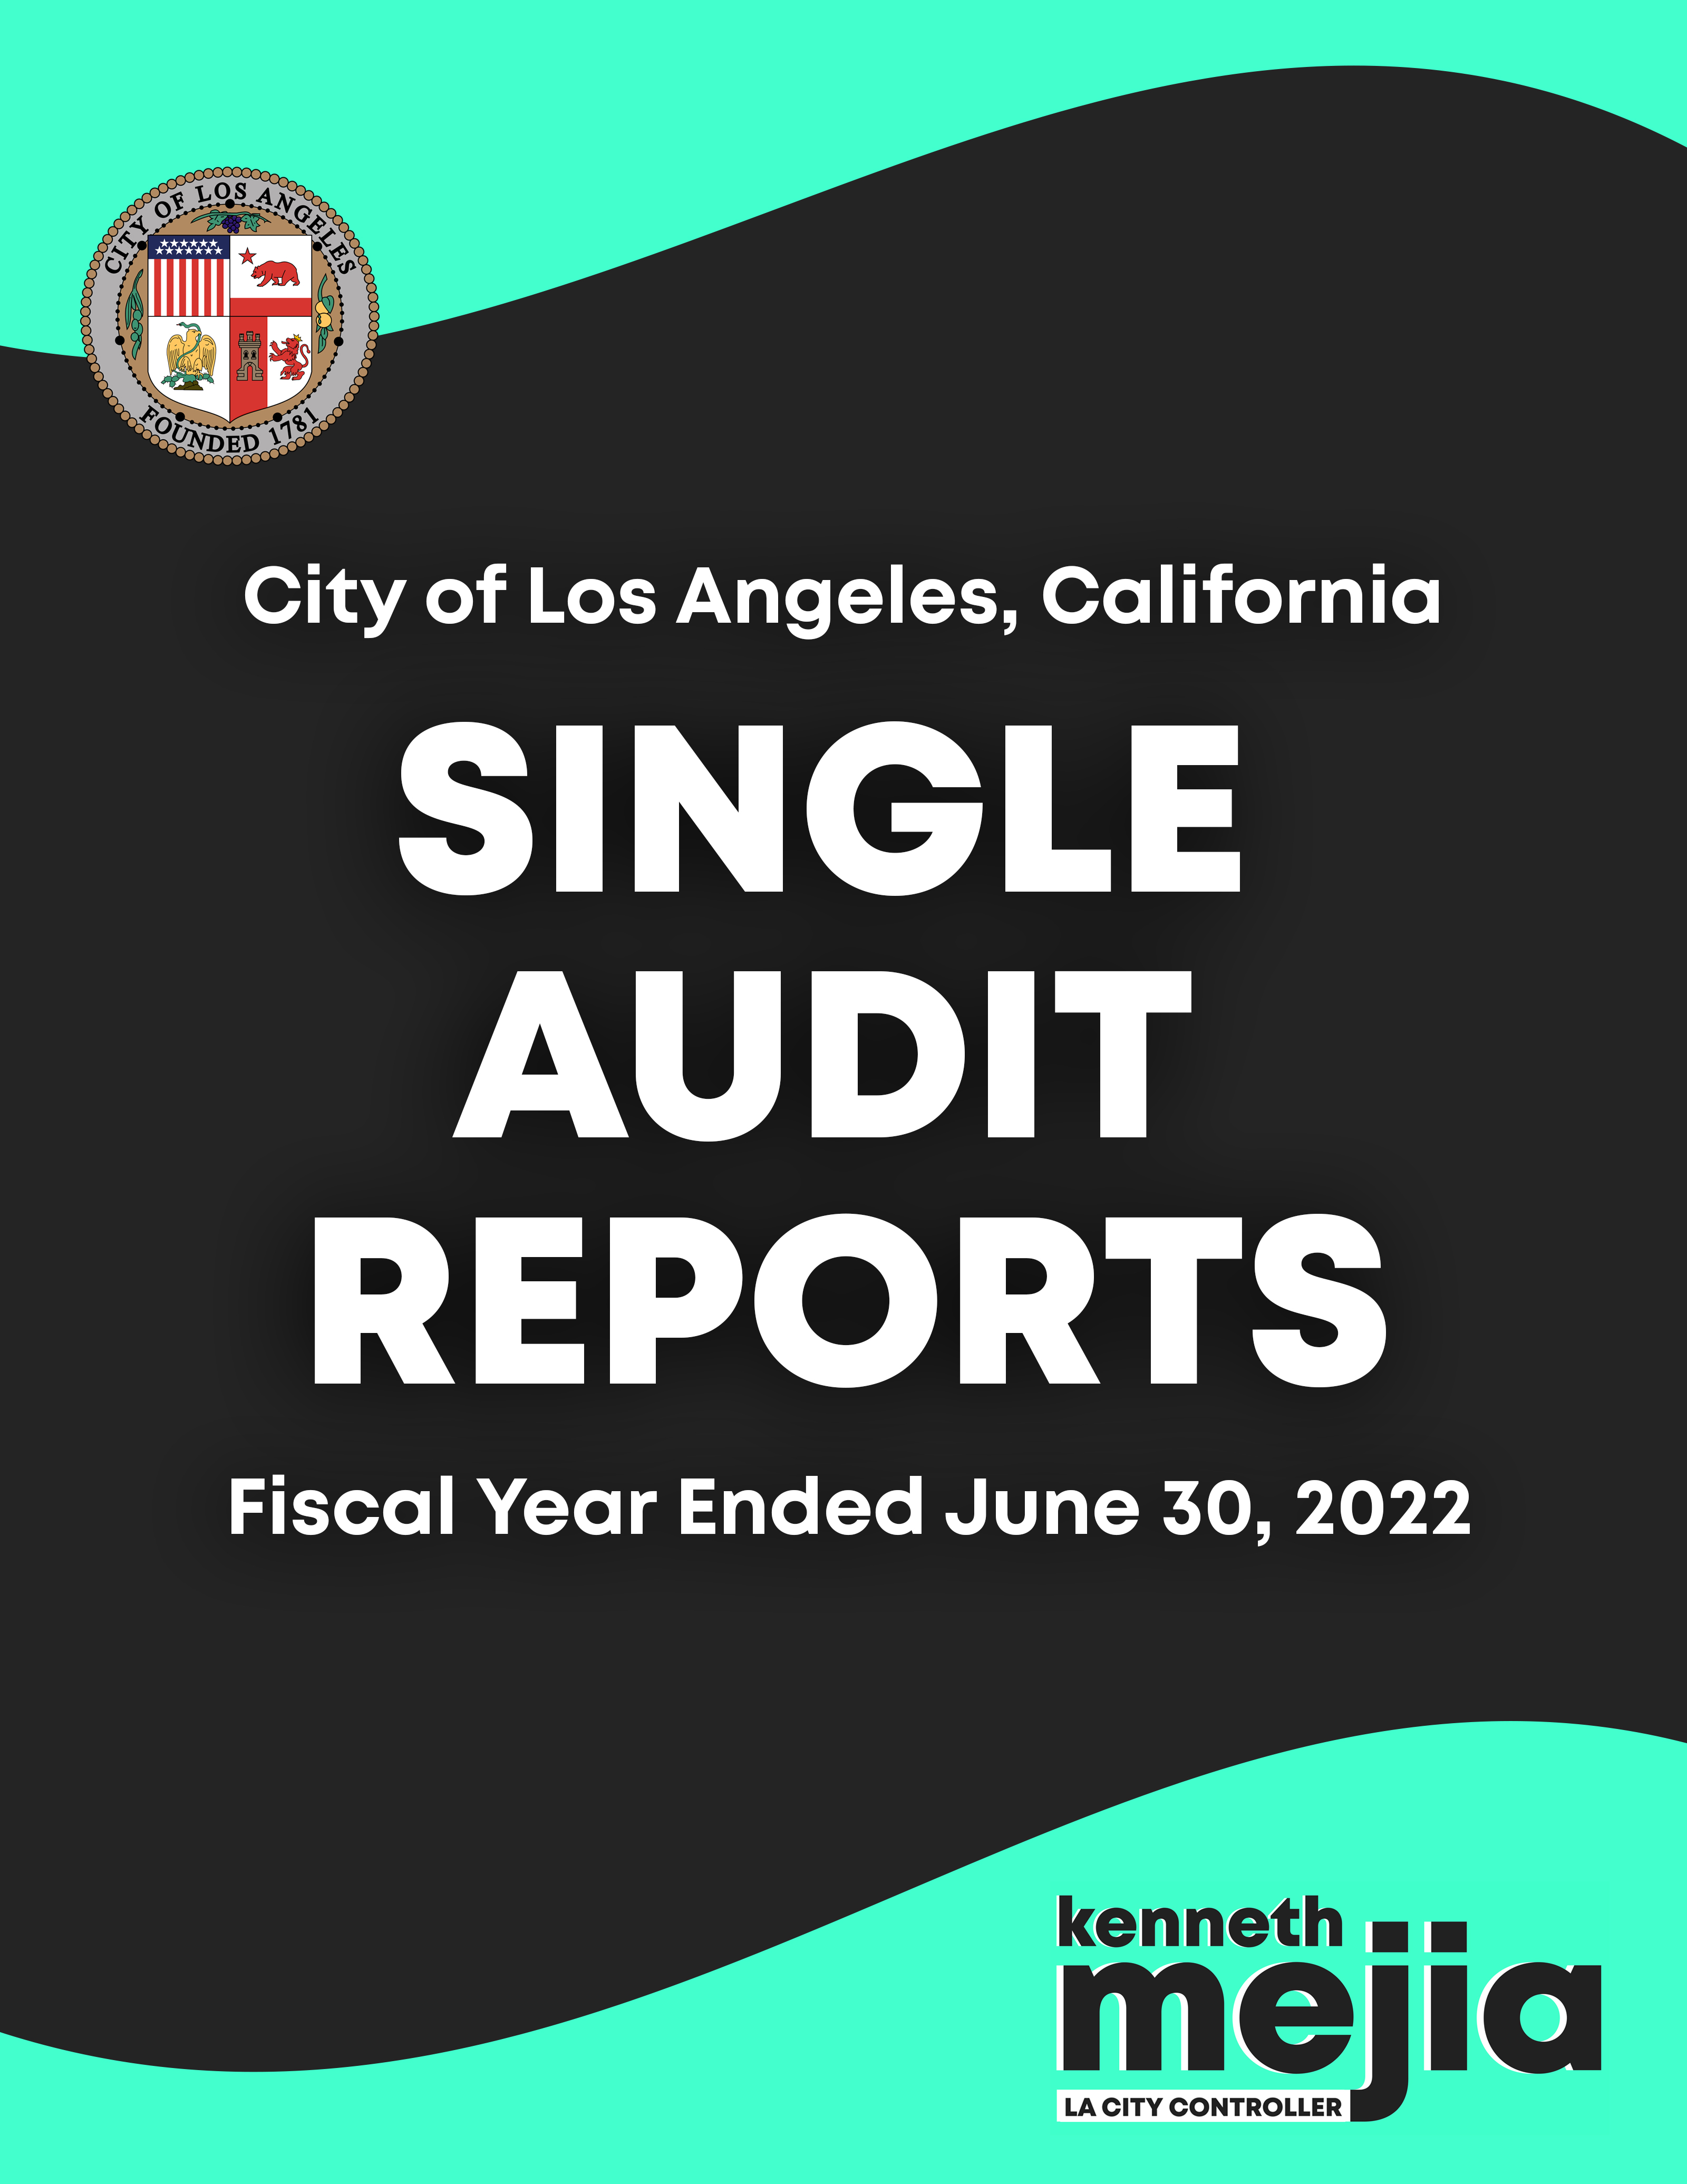 FY 2022 Single Audit Reports